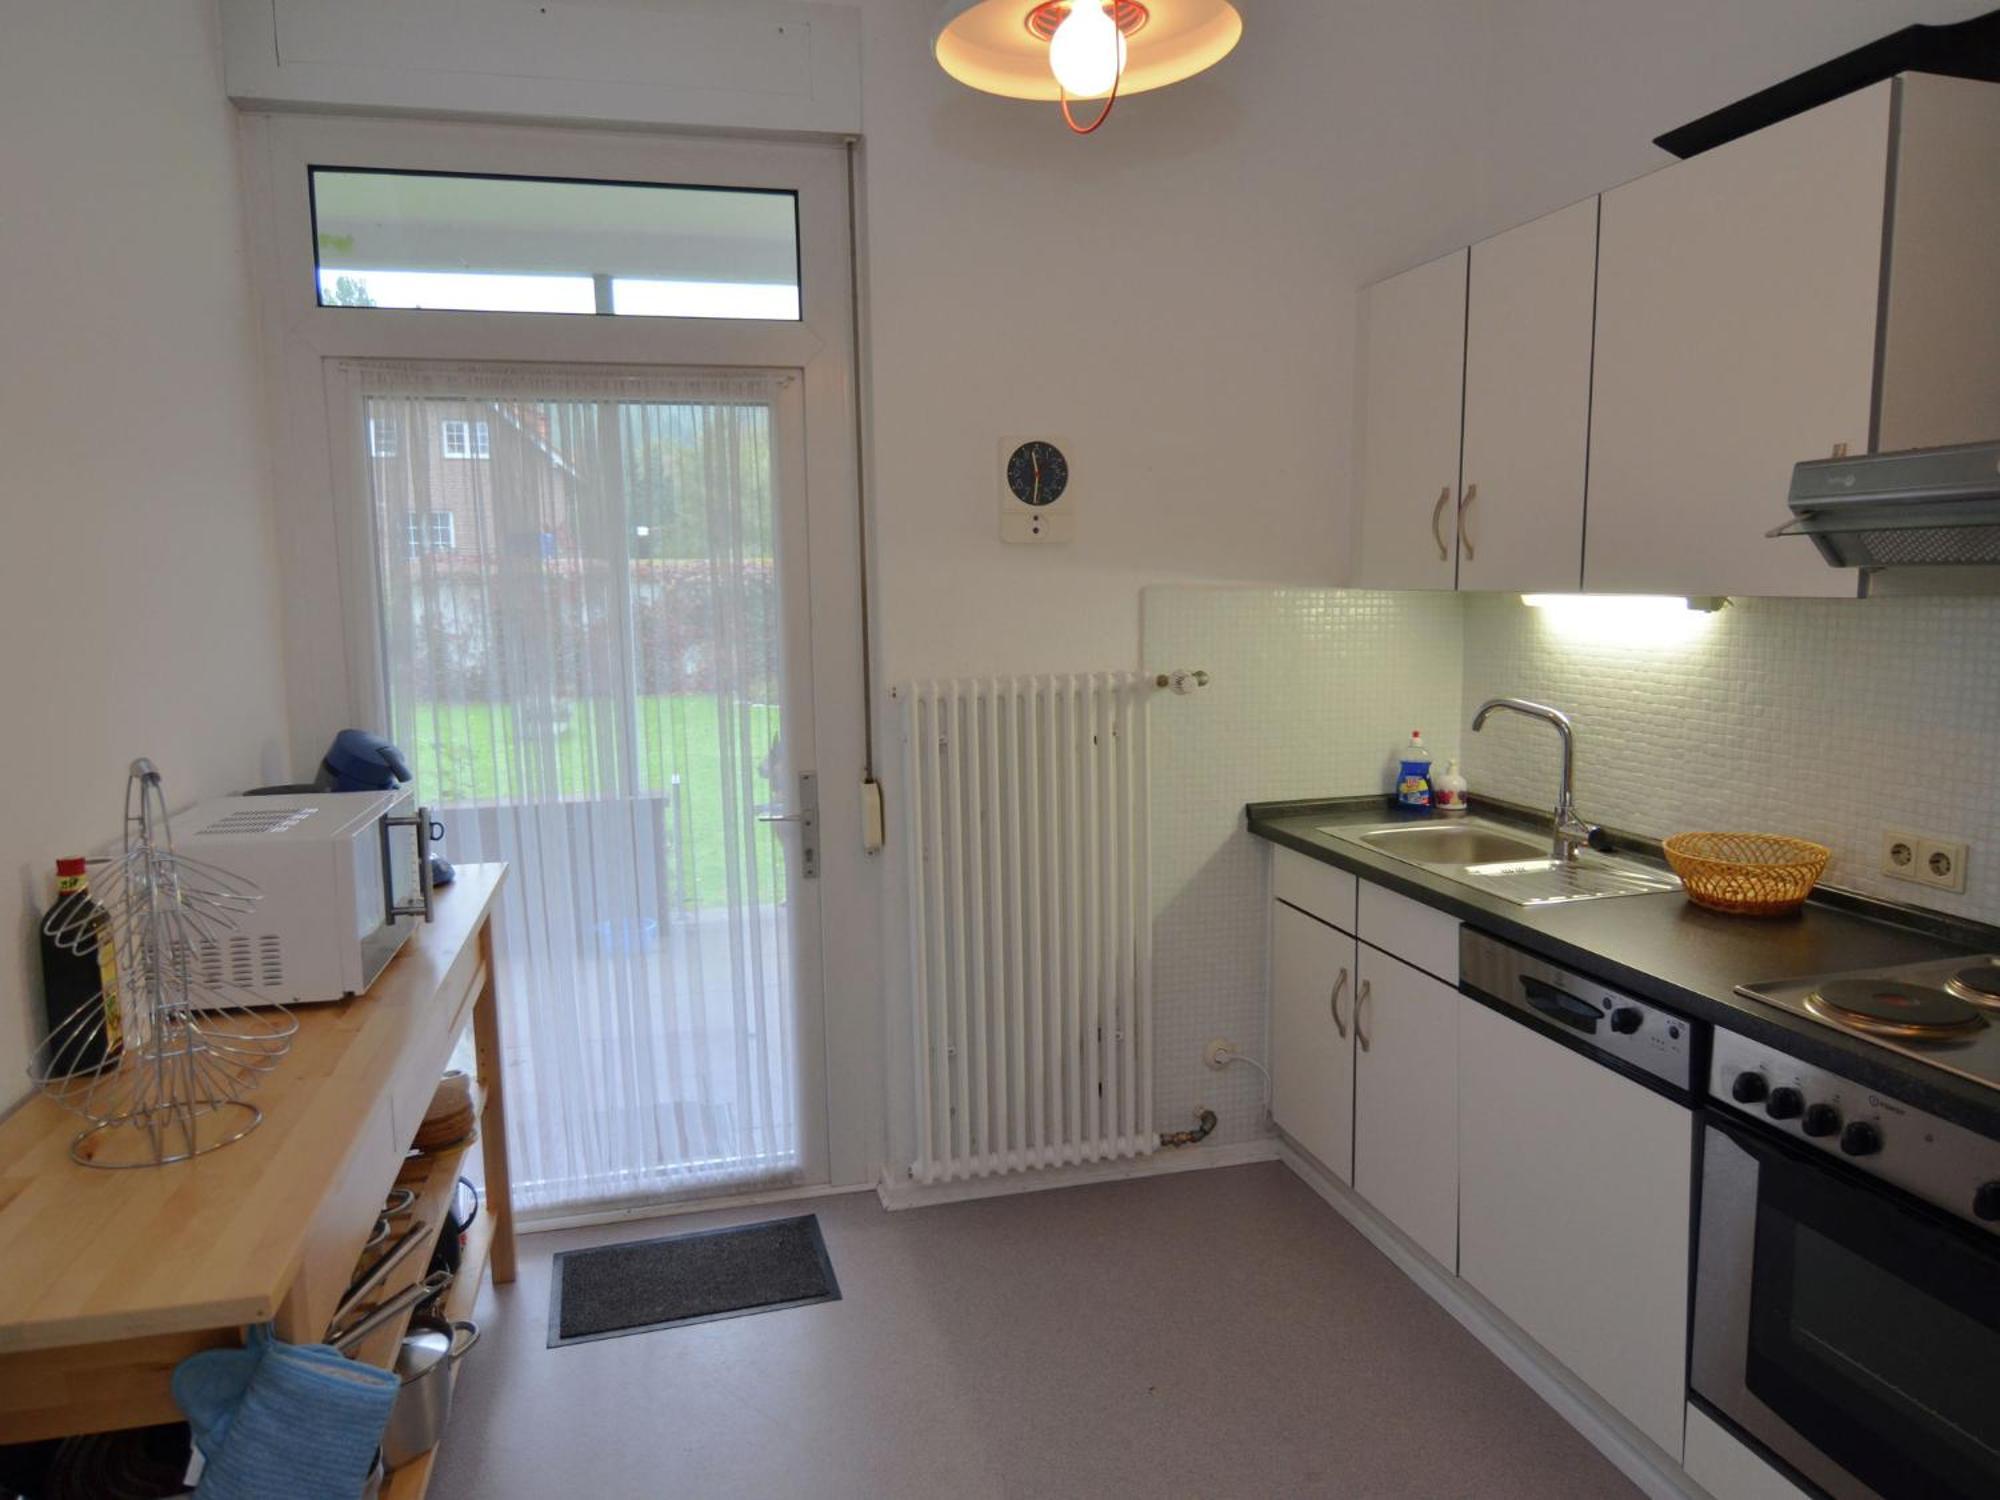 Spacious Apartment In Weser Uplands With Garden 巴特皮尔蒙特 外观 照片